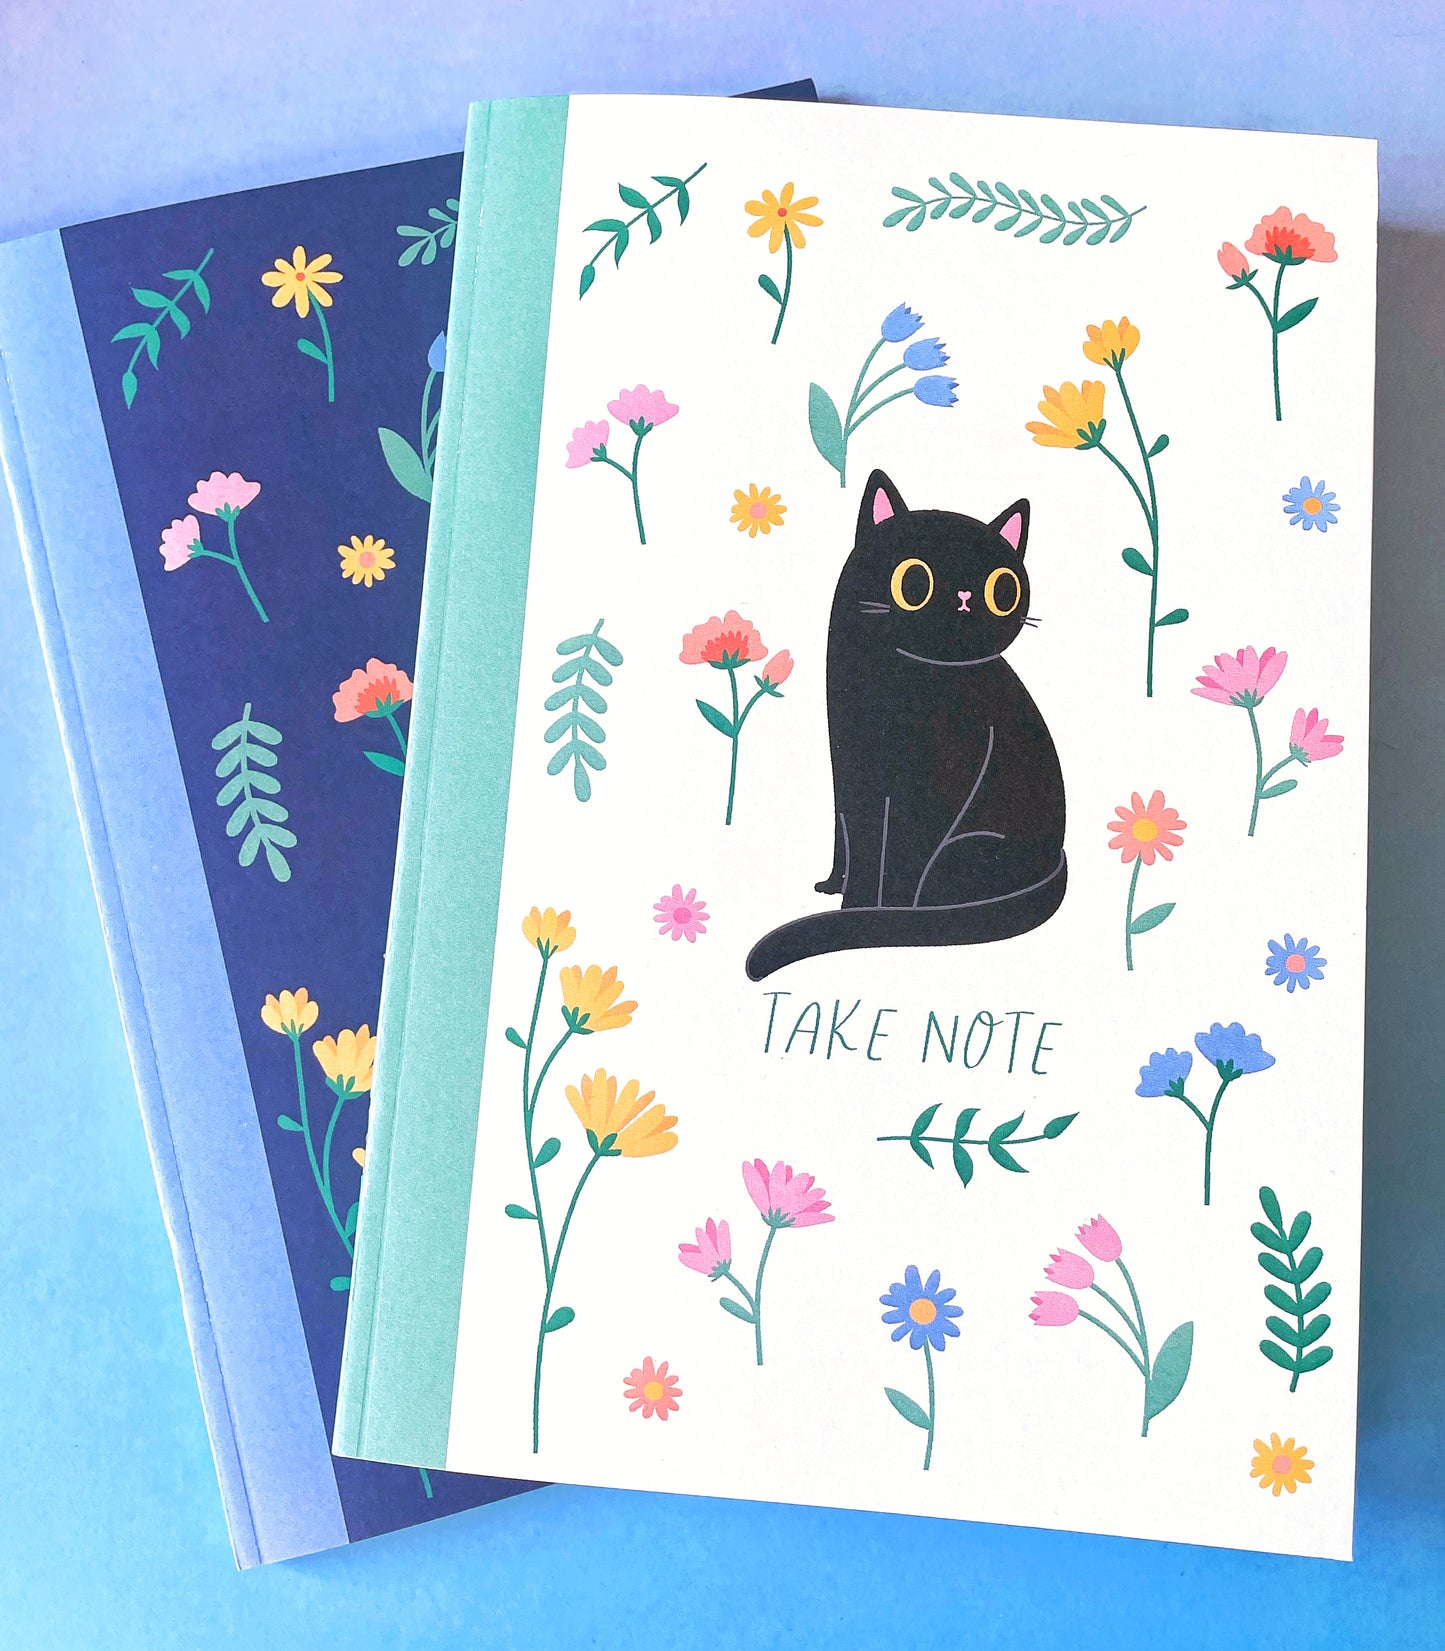 Wildflower A5 Notebook  Black cat version - recycled & eco friendly